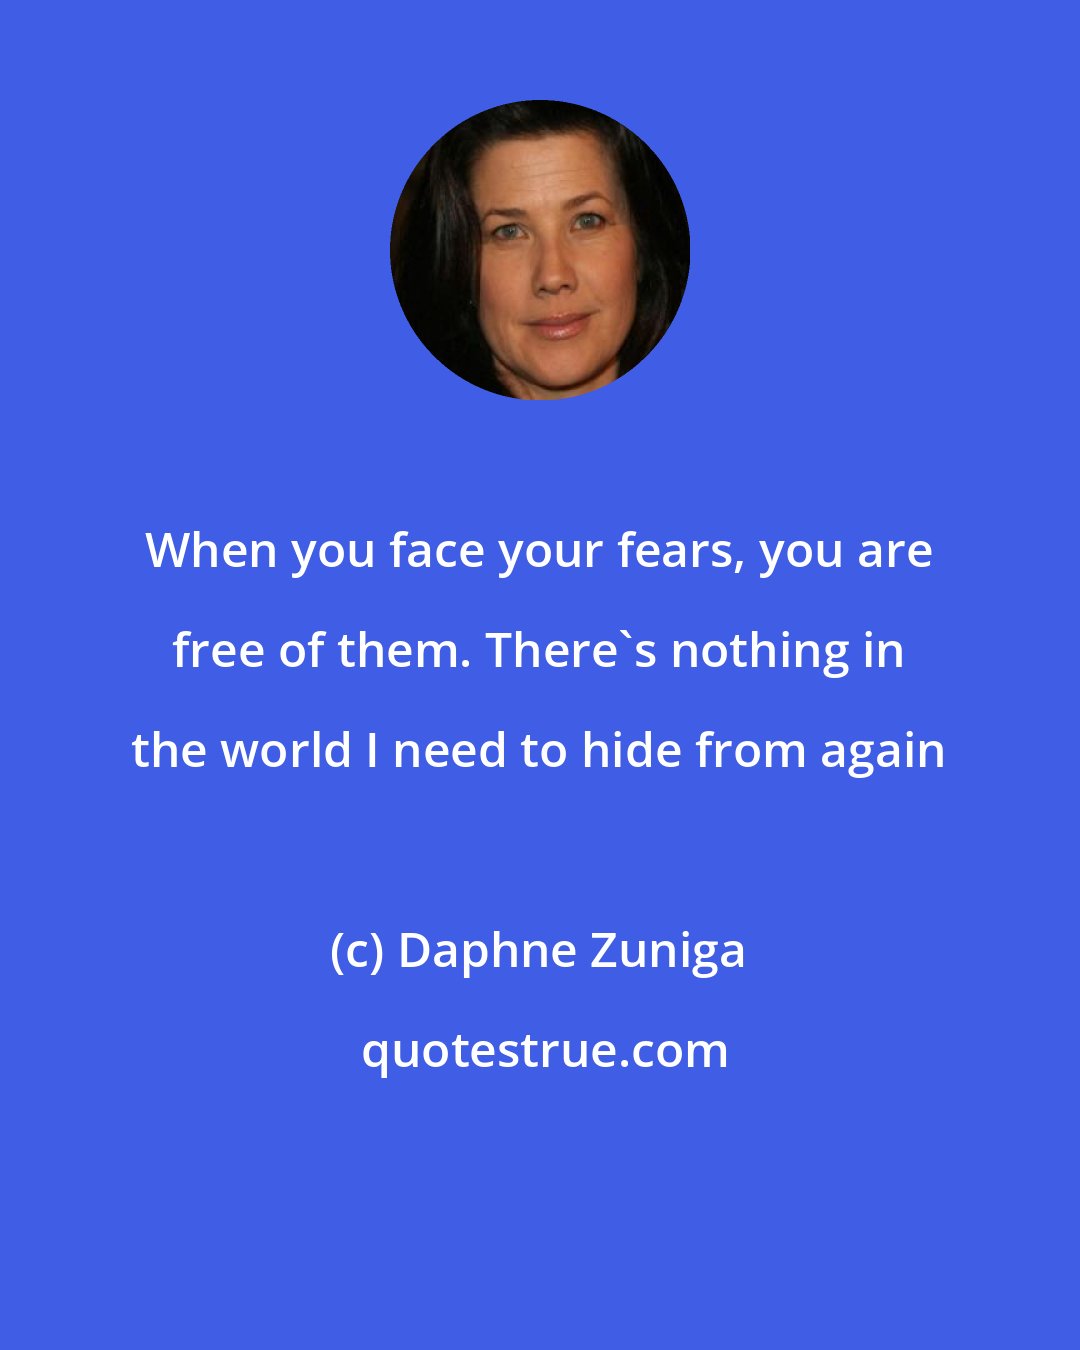 Daphne Zuniga: When you face your fears, you are free of them. There's nothing in the world I need to hide from again